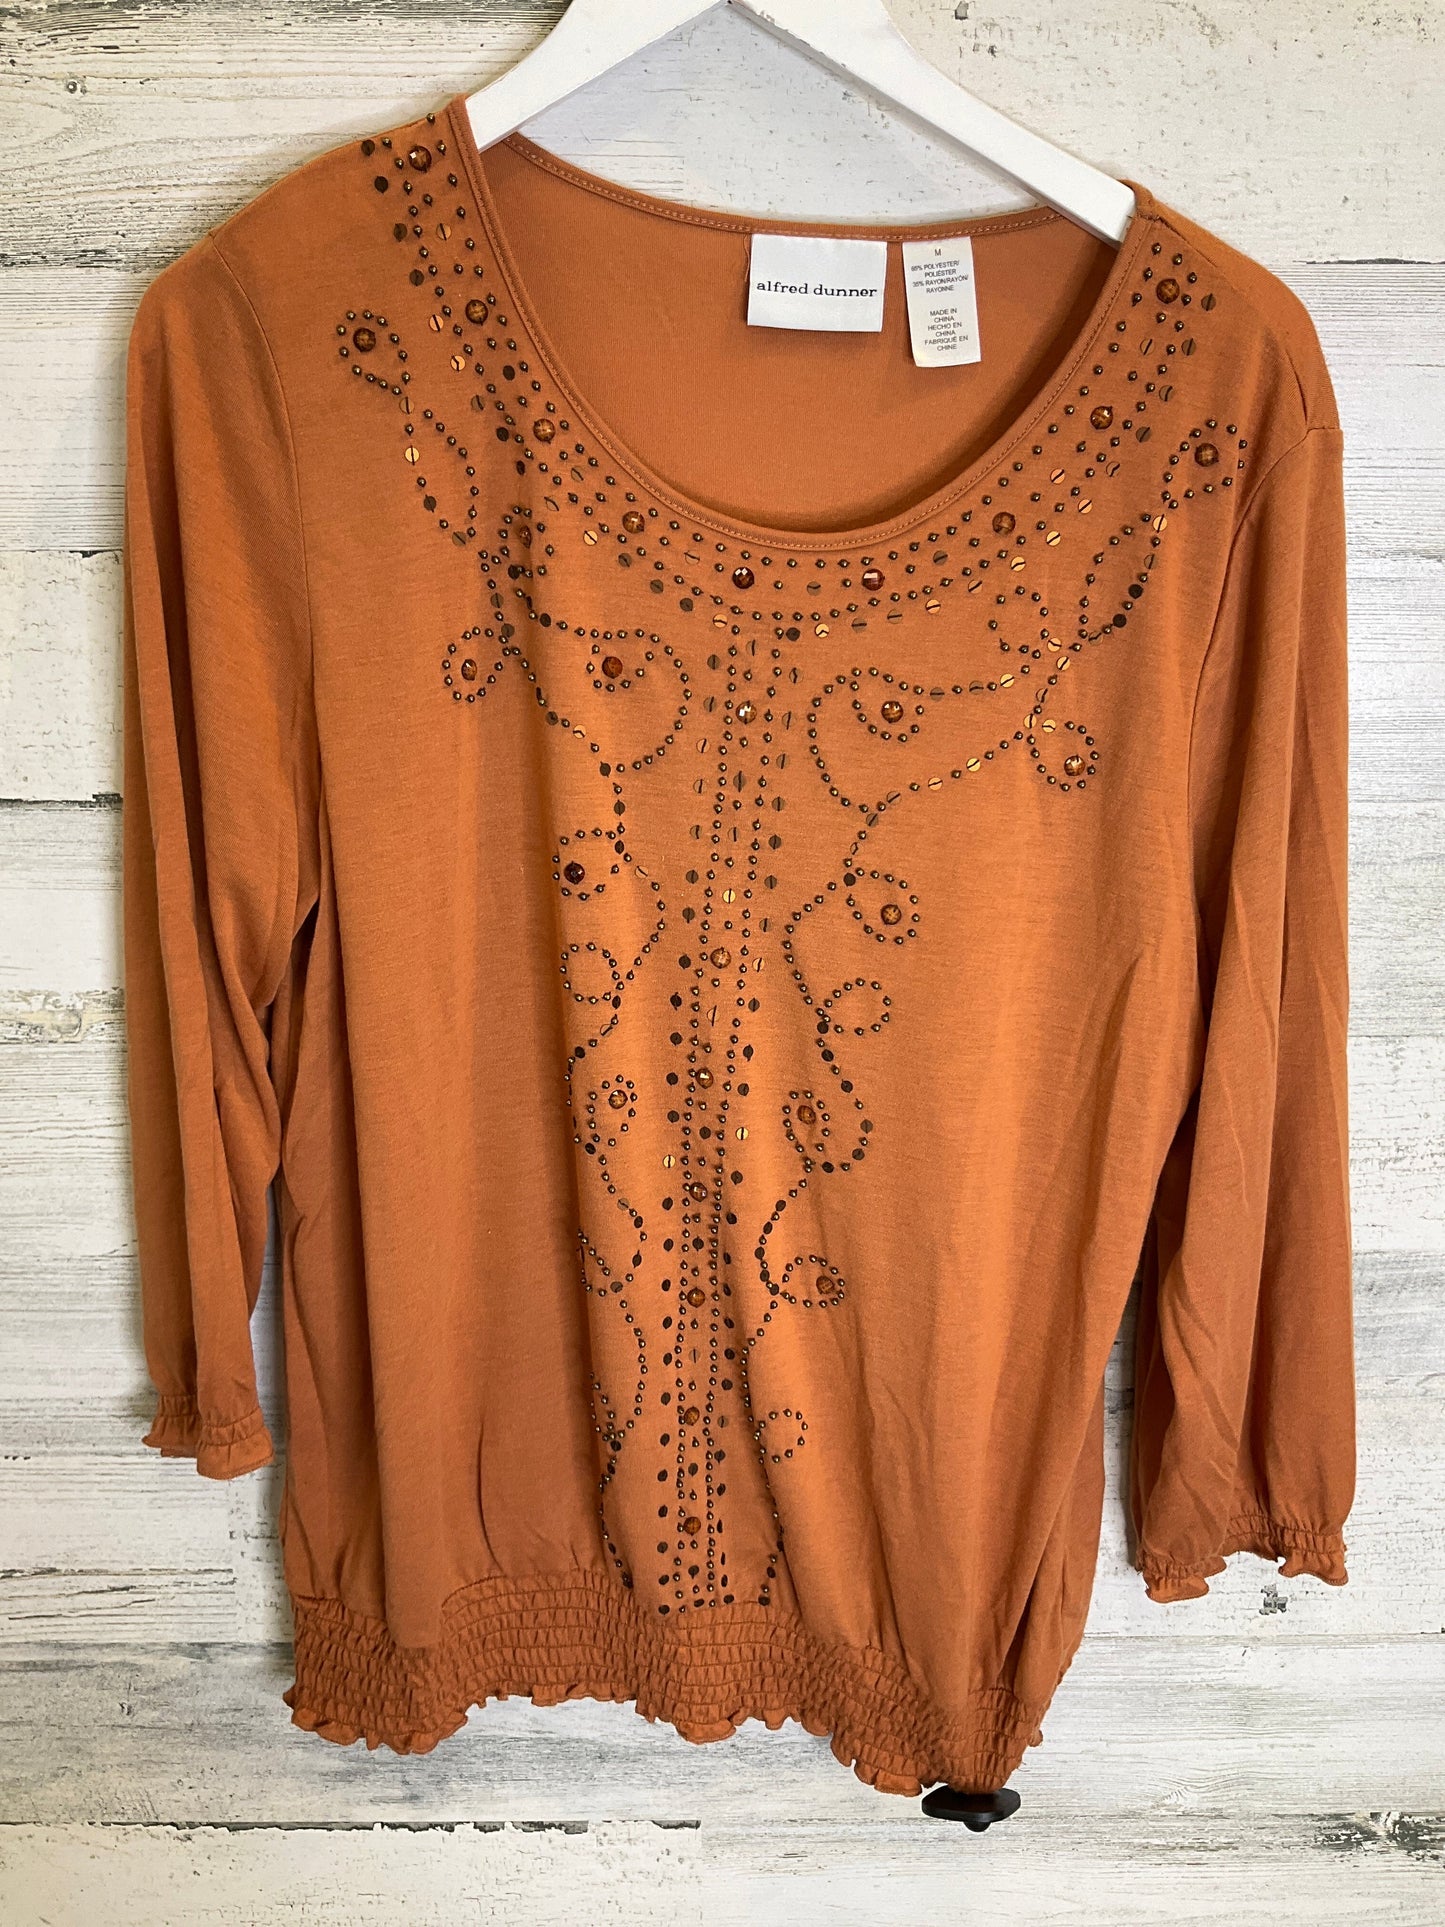 Orange Top Long Sleeve Alfred Dunner, Size M